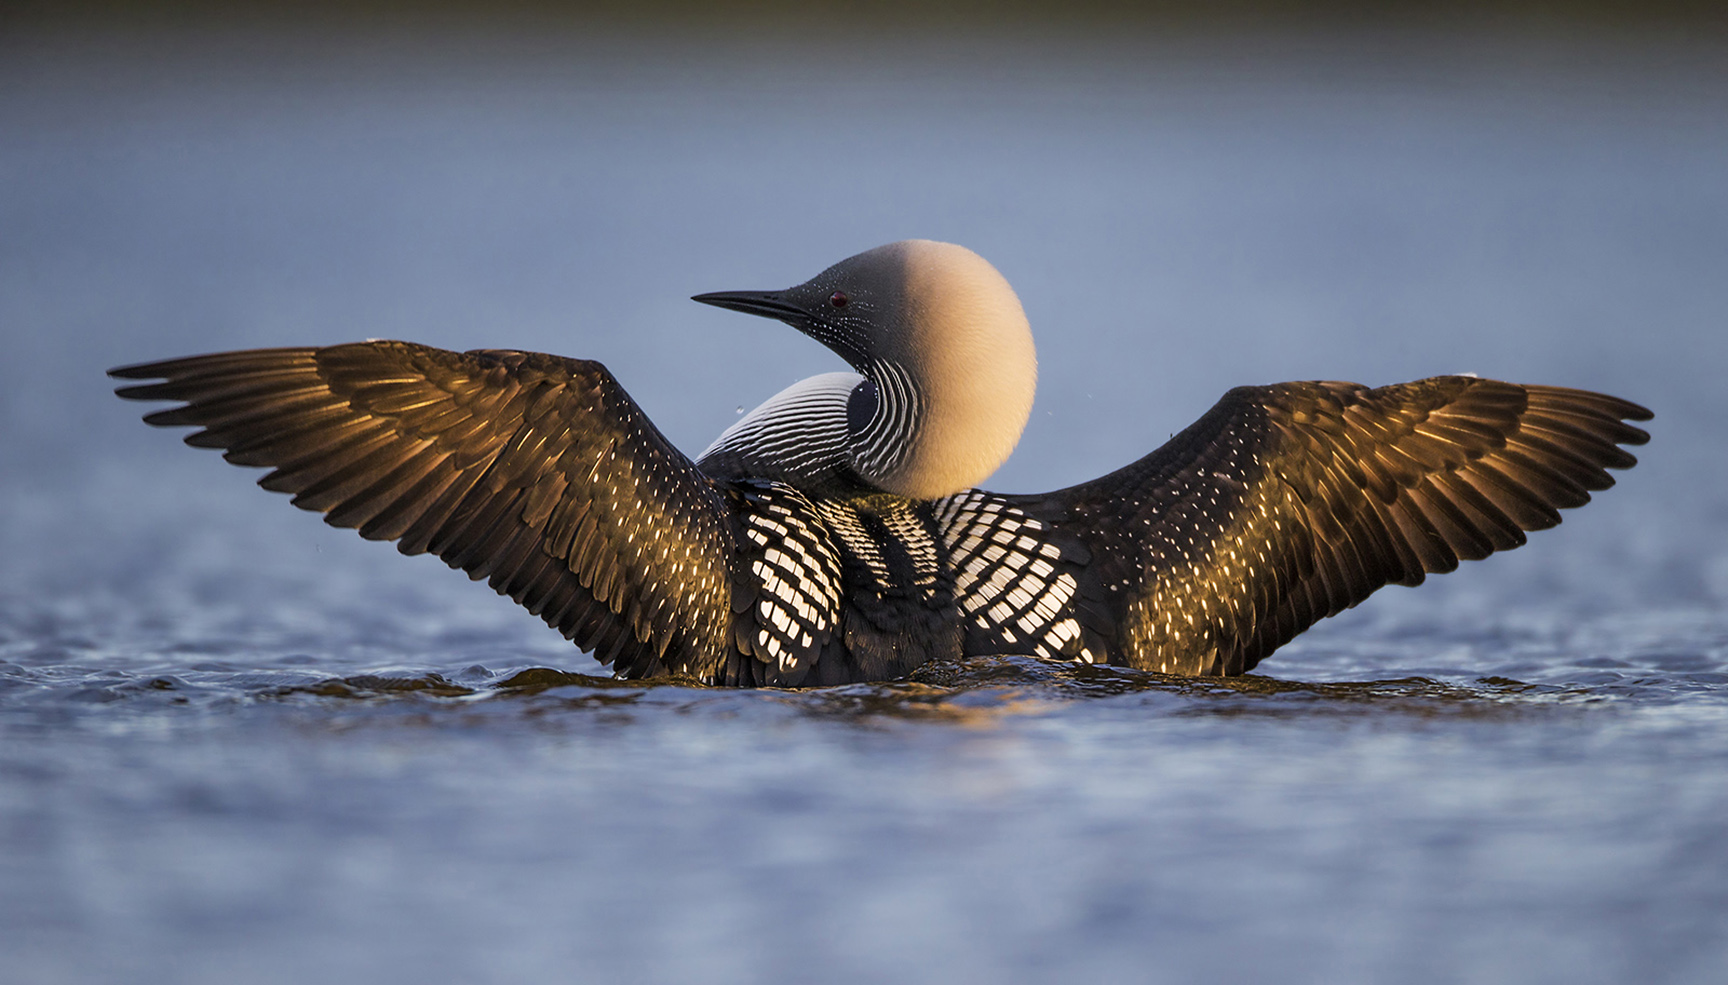 Pacific Loon (Gavia pacifica), Least Concern. Photo by Jeff Dyck